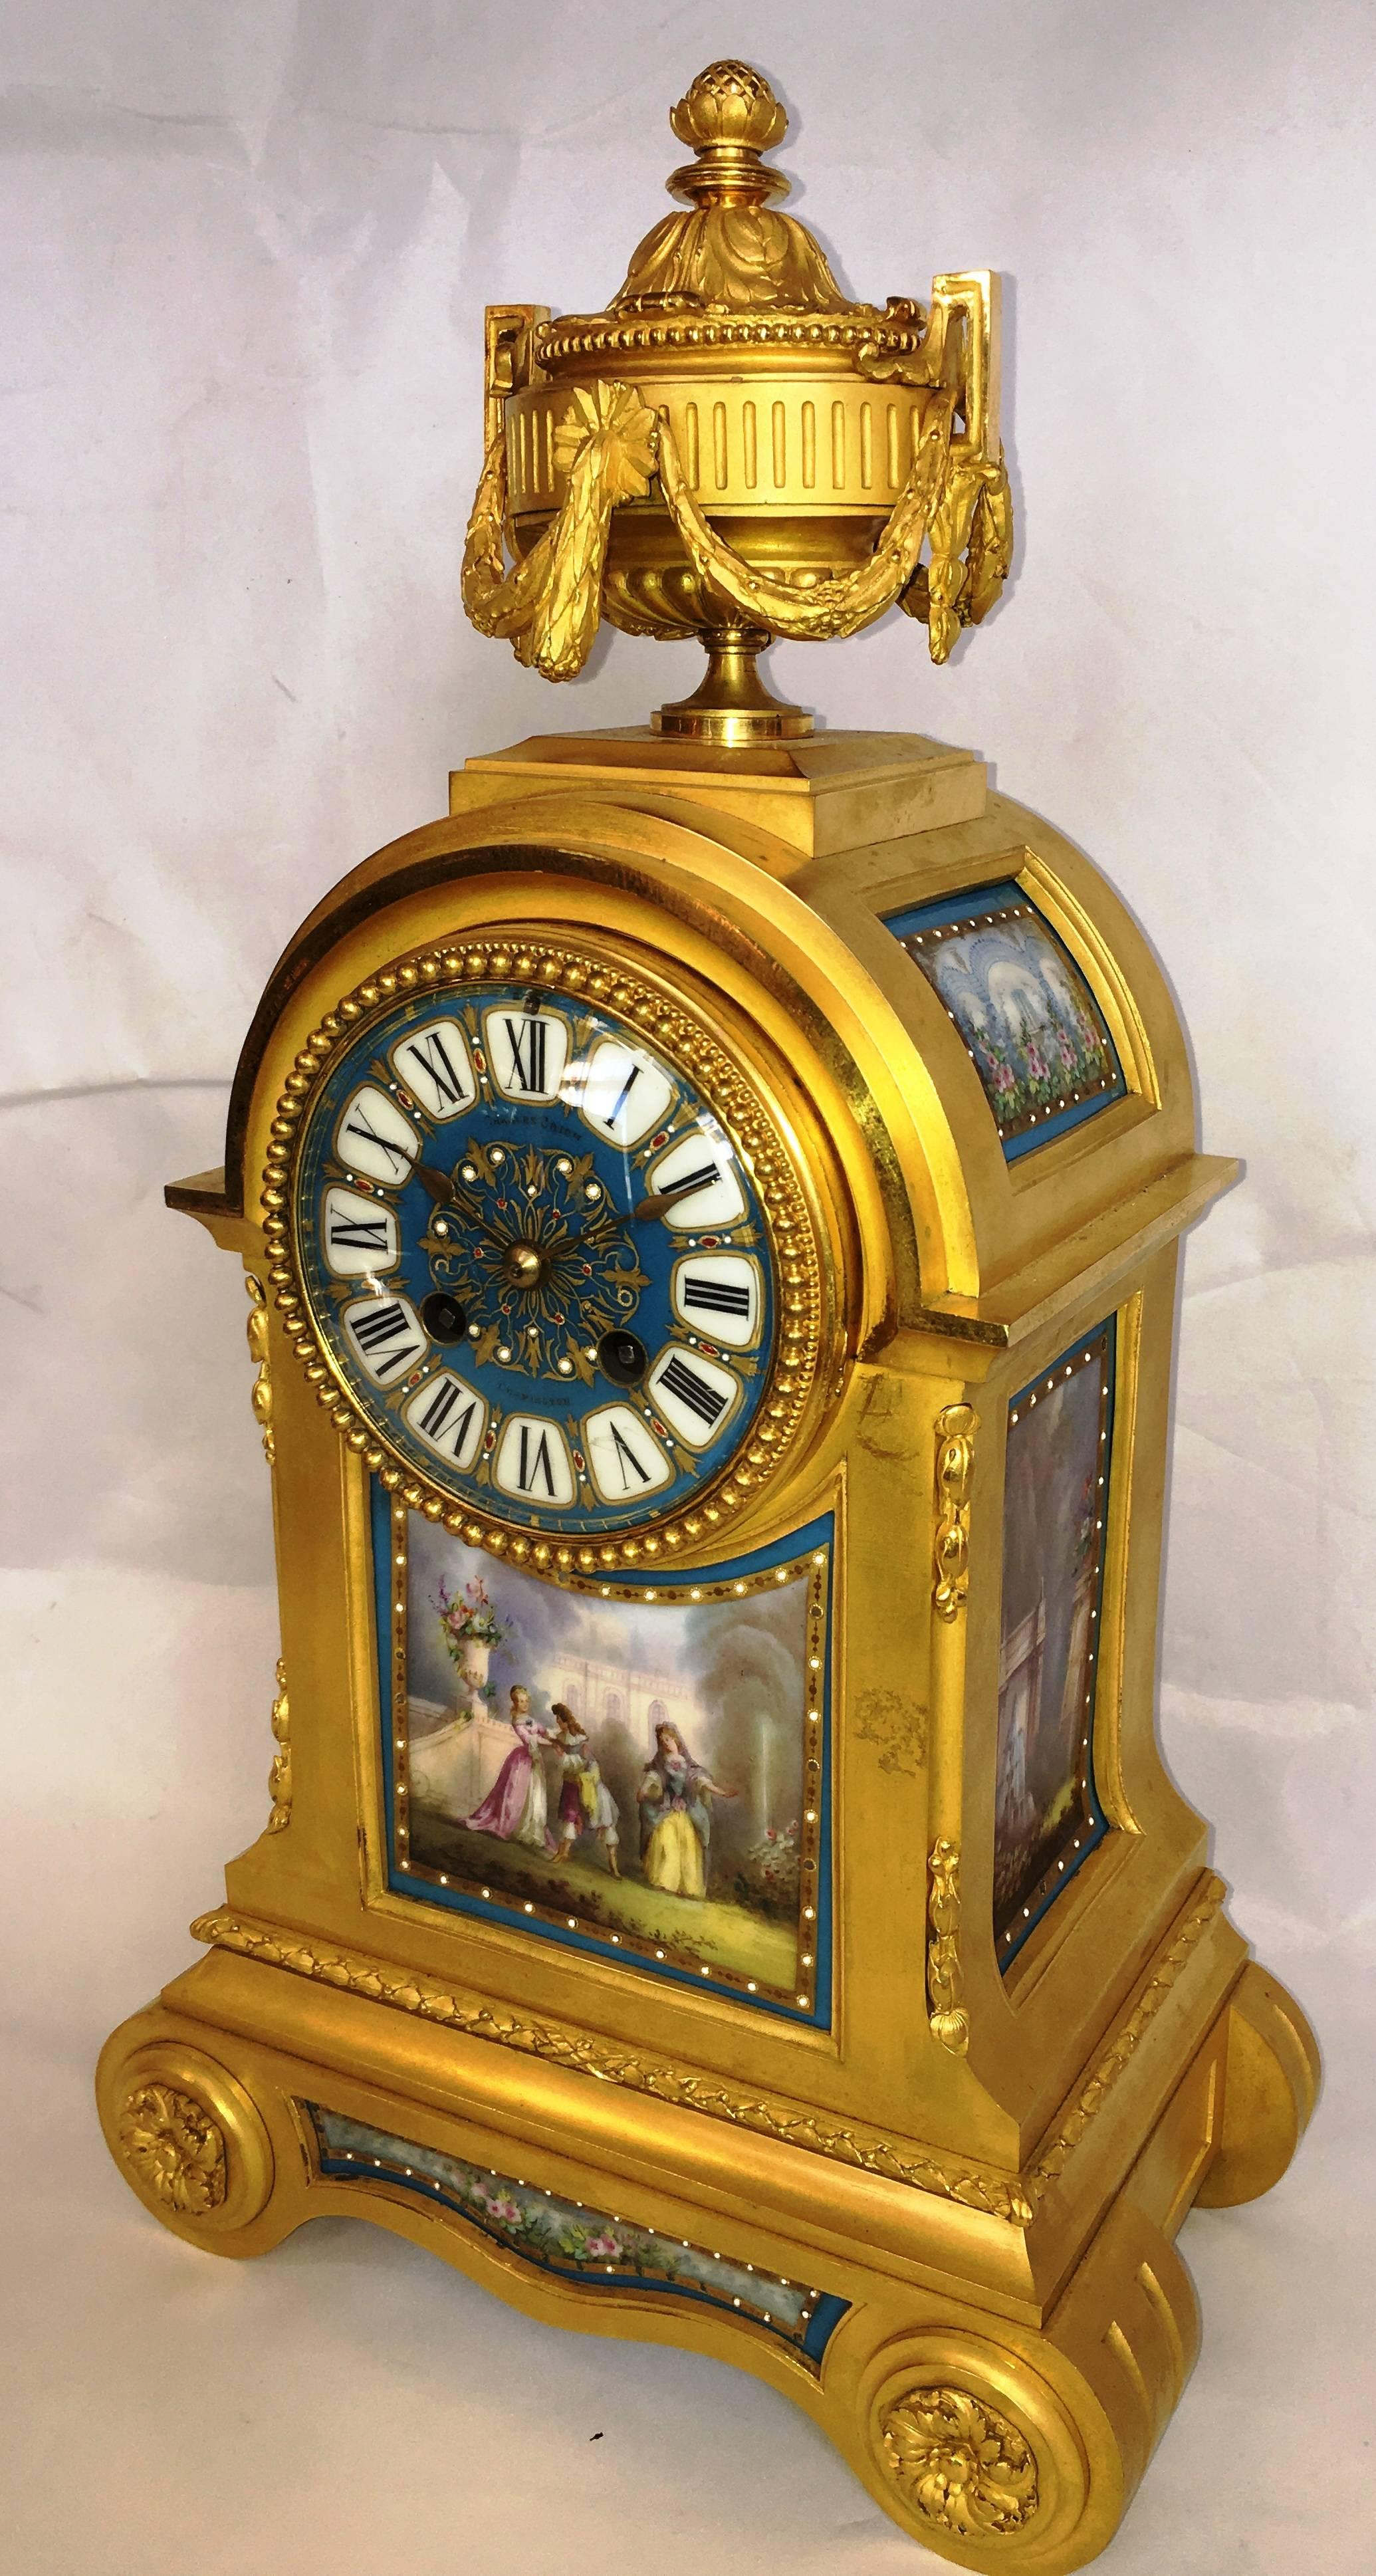 A very good quality 19th century French gilded ormolu mantel clock, having Sevres style porcelain panels, depicting a romantic scene, a gilded ormolu urn with swags above the clock face, the movement being of an eight day duration and chiming every